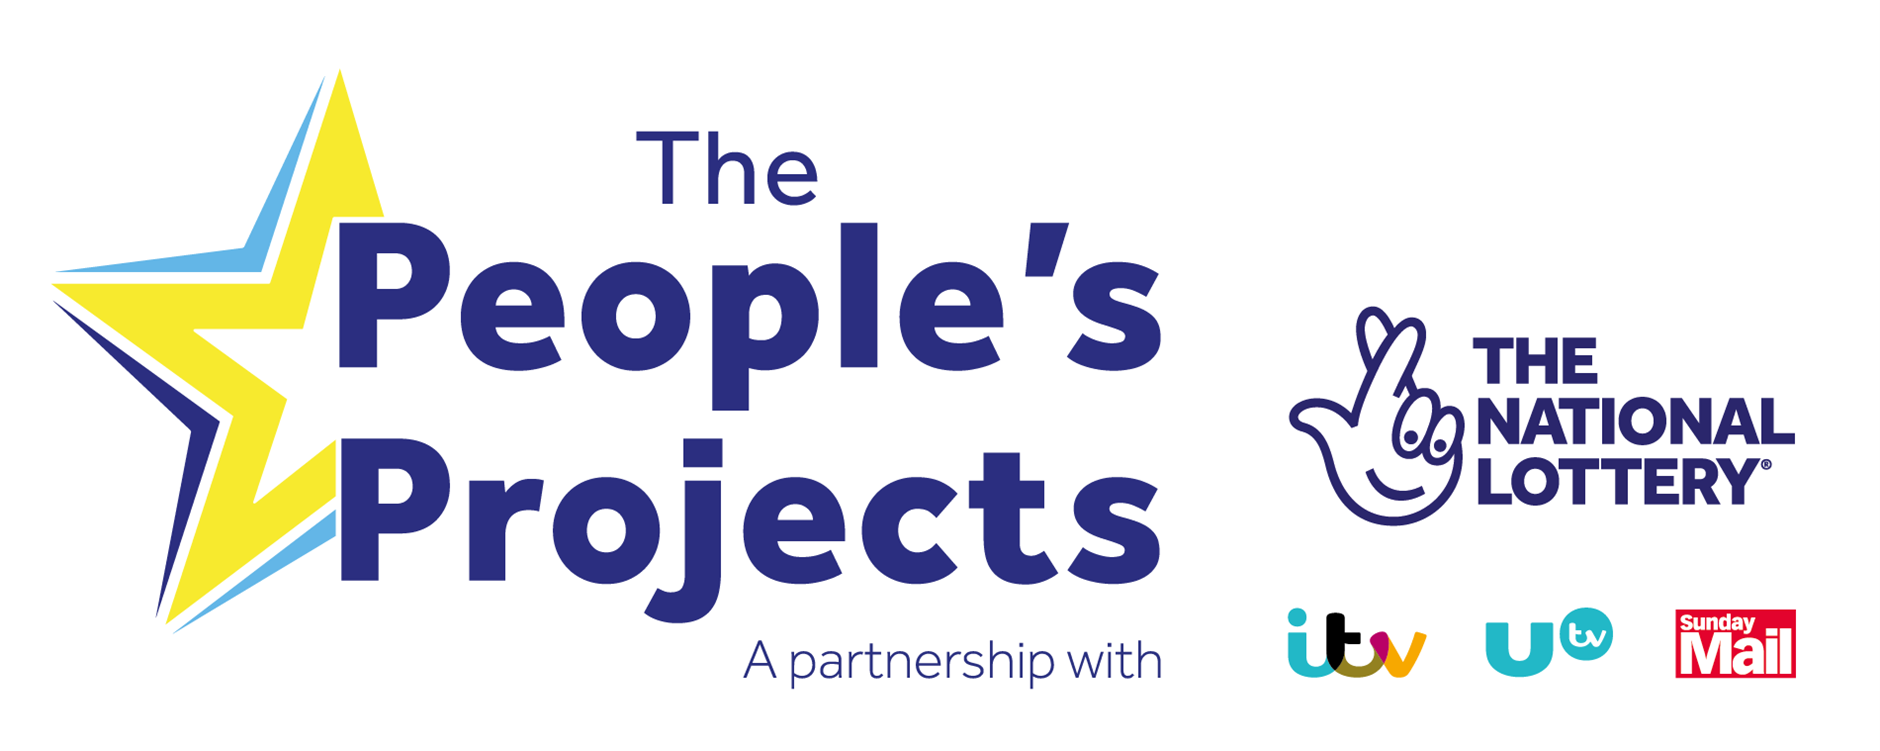 The People's Project Logo